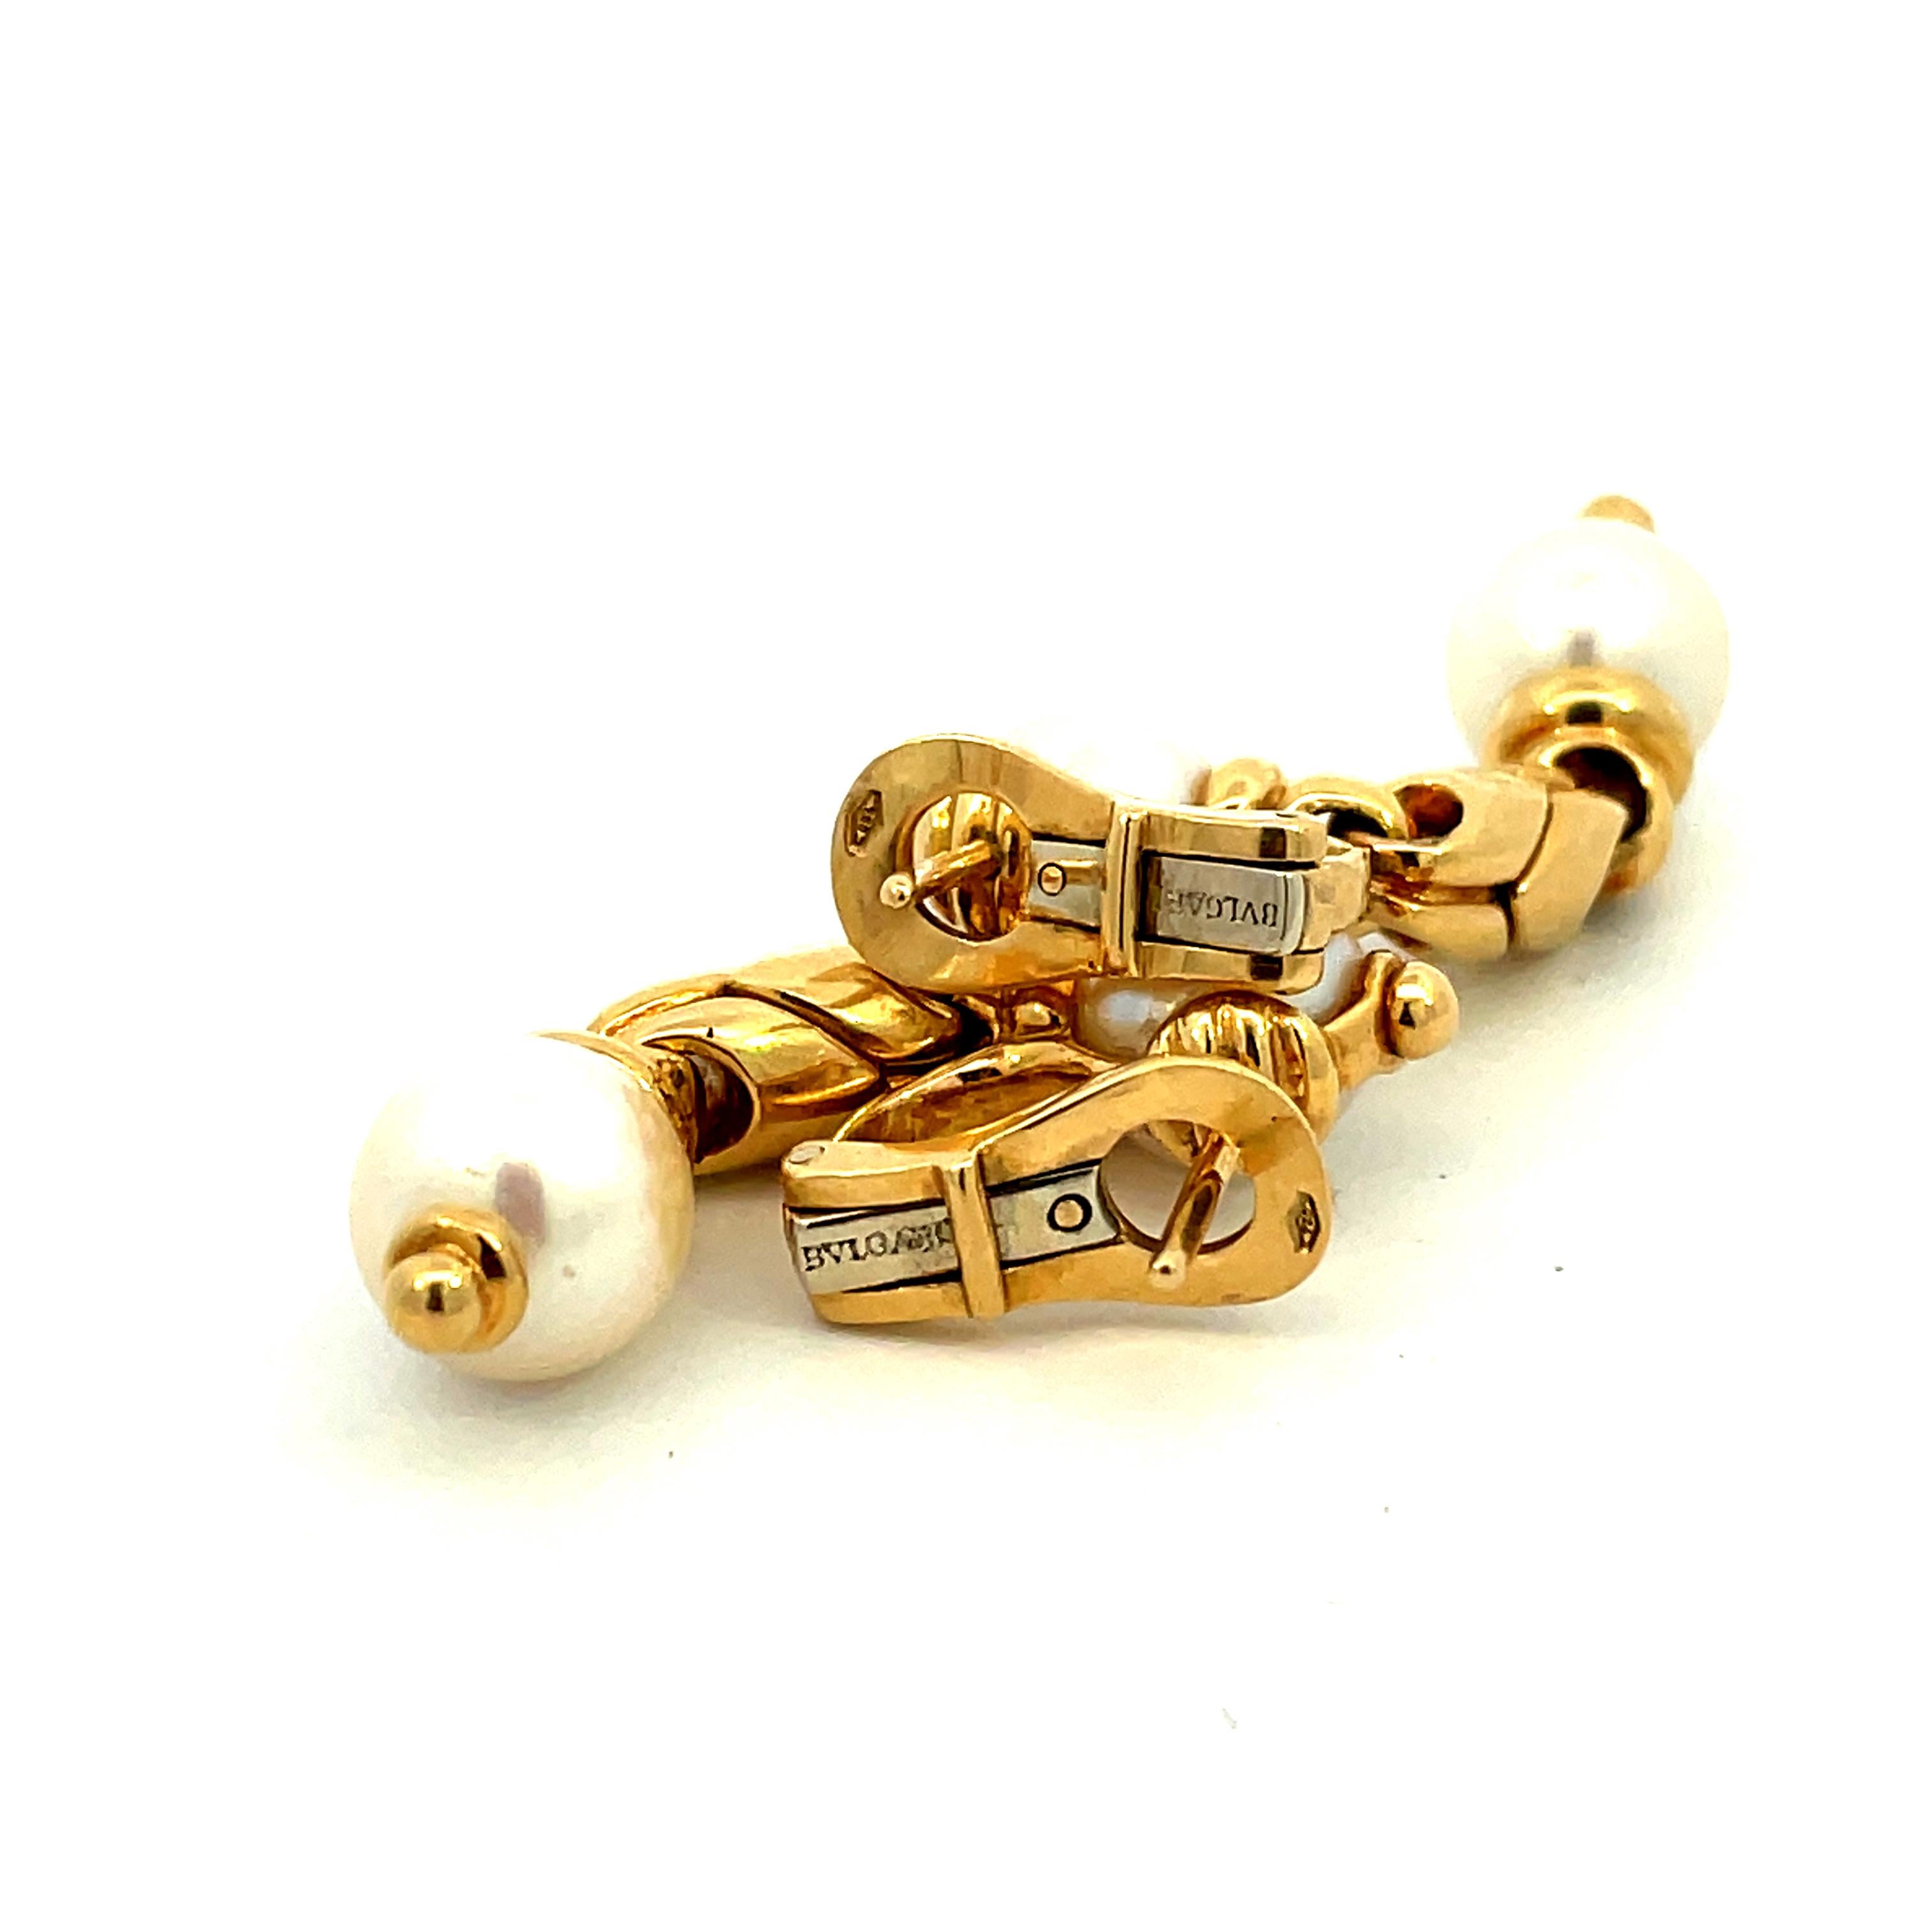 Cultered Pearls and 18kt yellow gold, stamped Bulgari.
4 Centimeters long.
